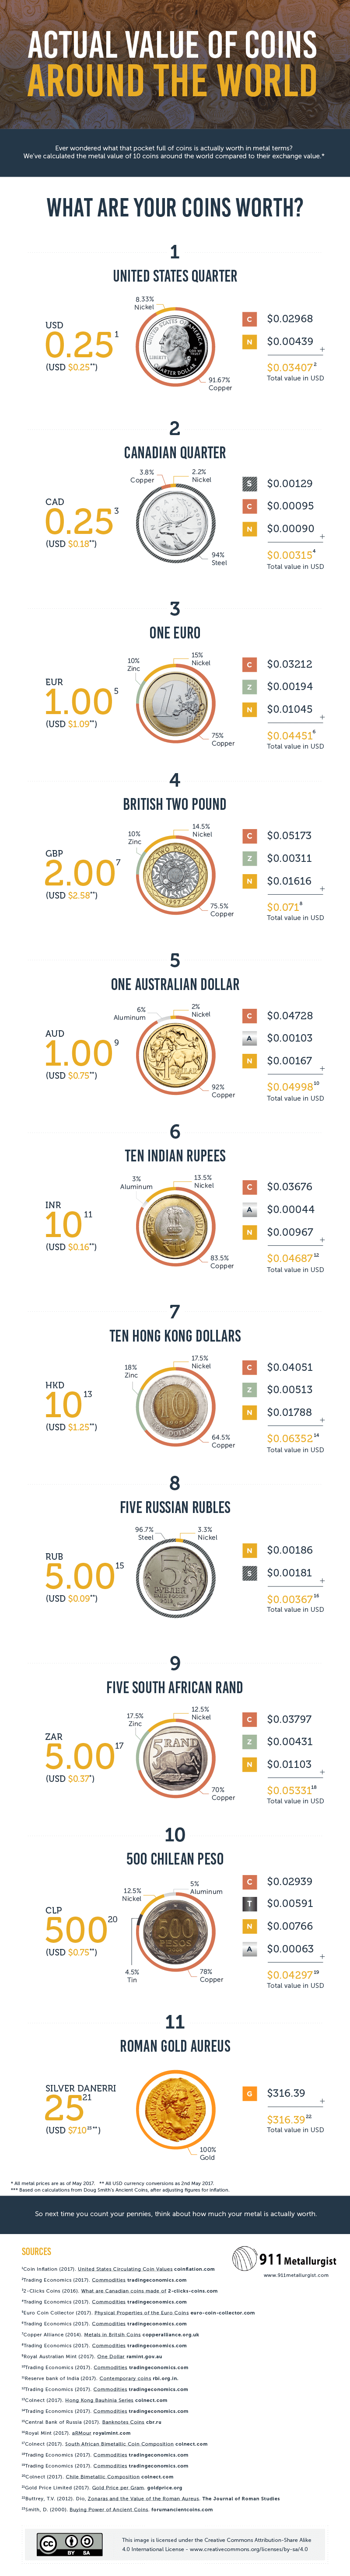 Actual Value of Coins Around the World